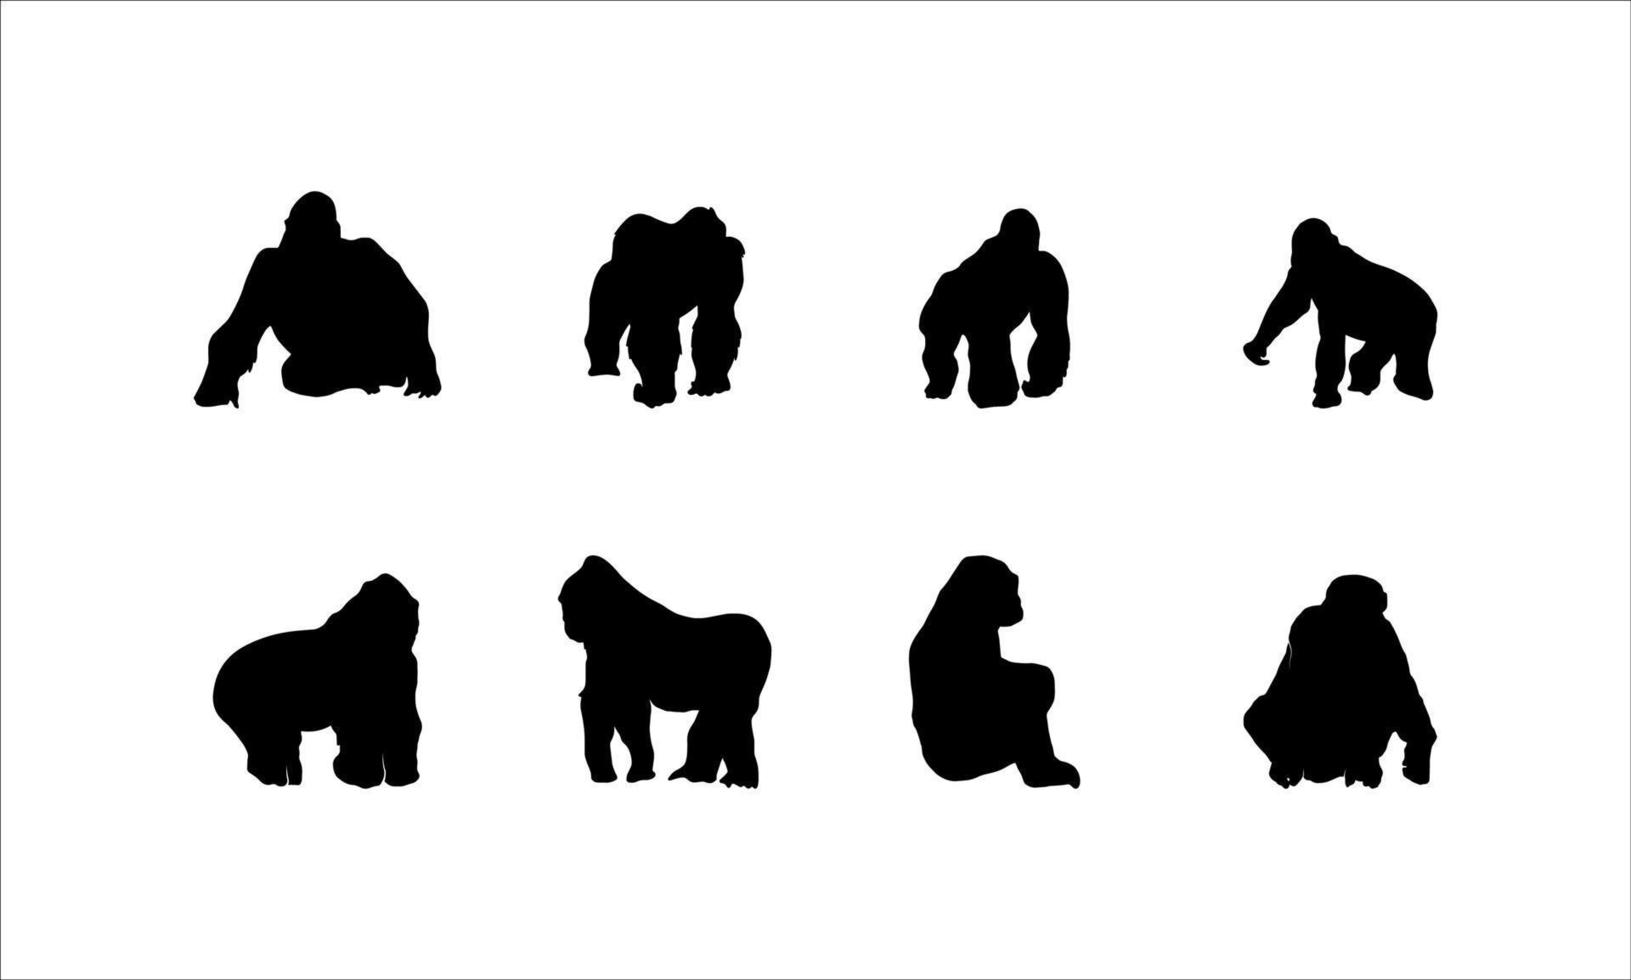 Collection of Gorilla Silhouette Illustrations vector